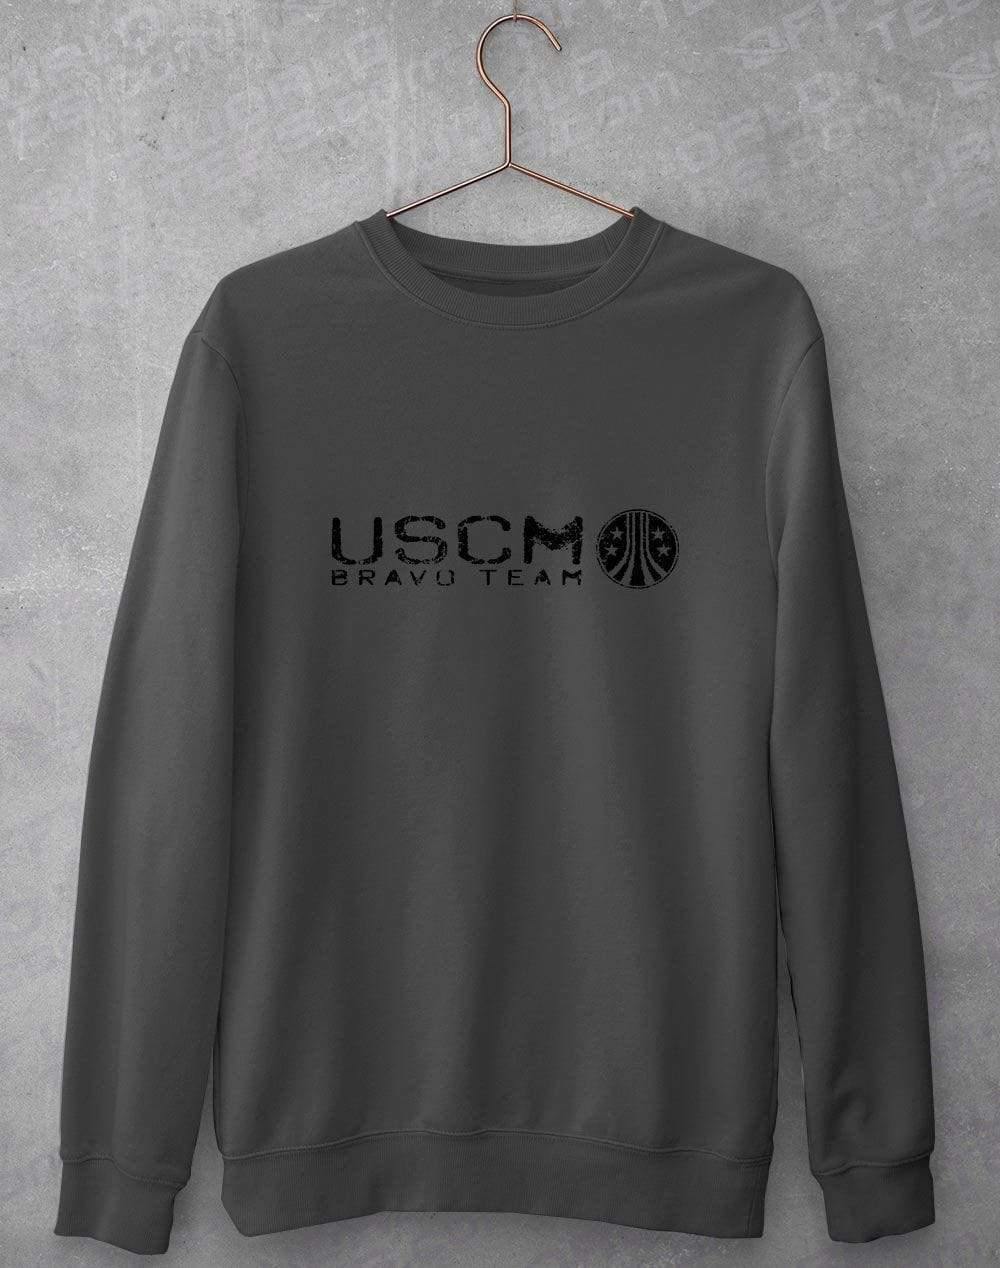 USCM United States Colonial Marines Sweatshirt S / Charcoal  - Off World Tees